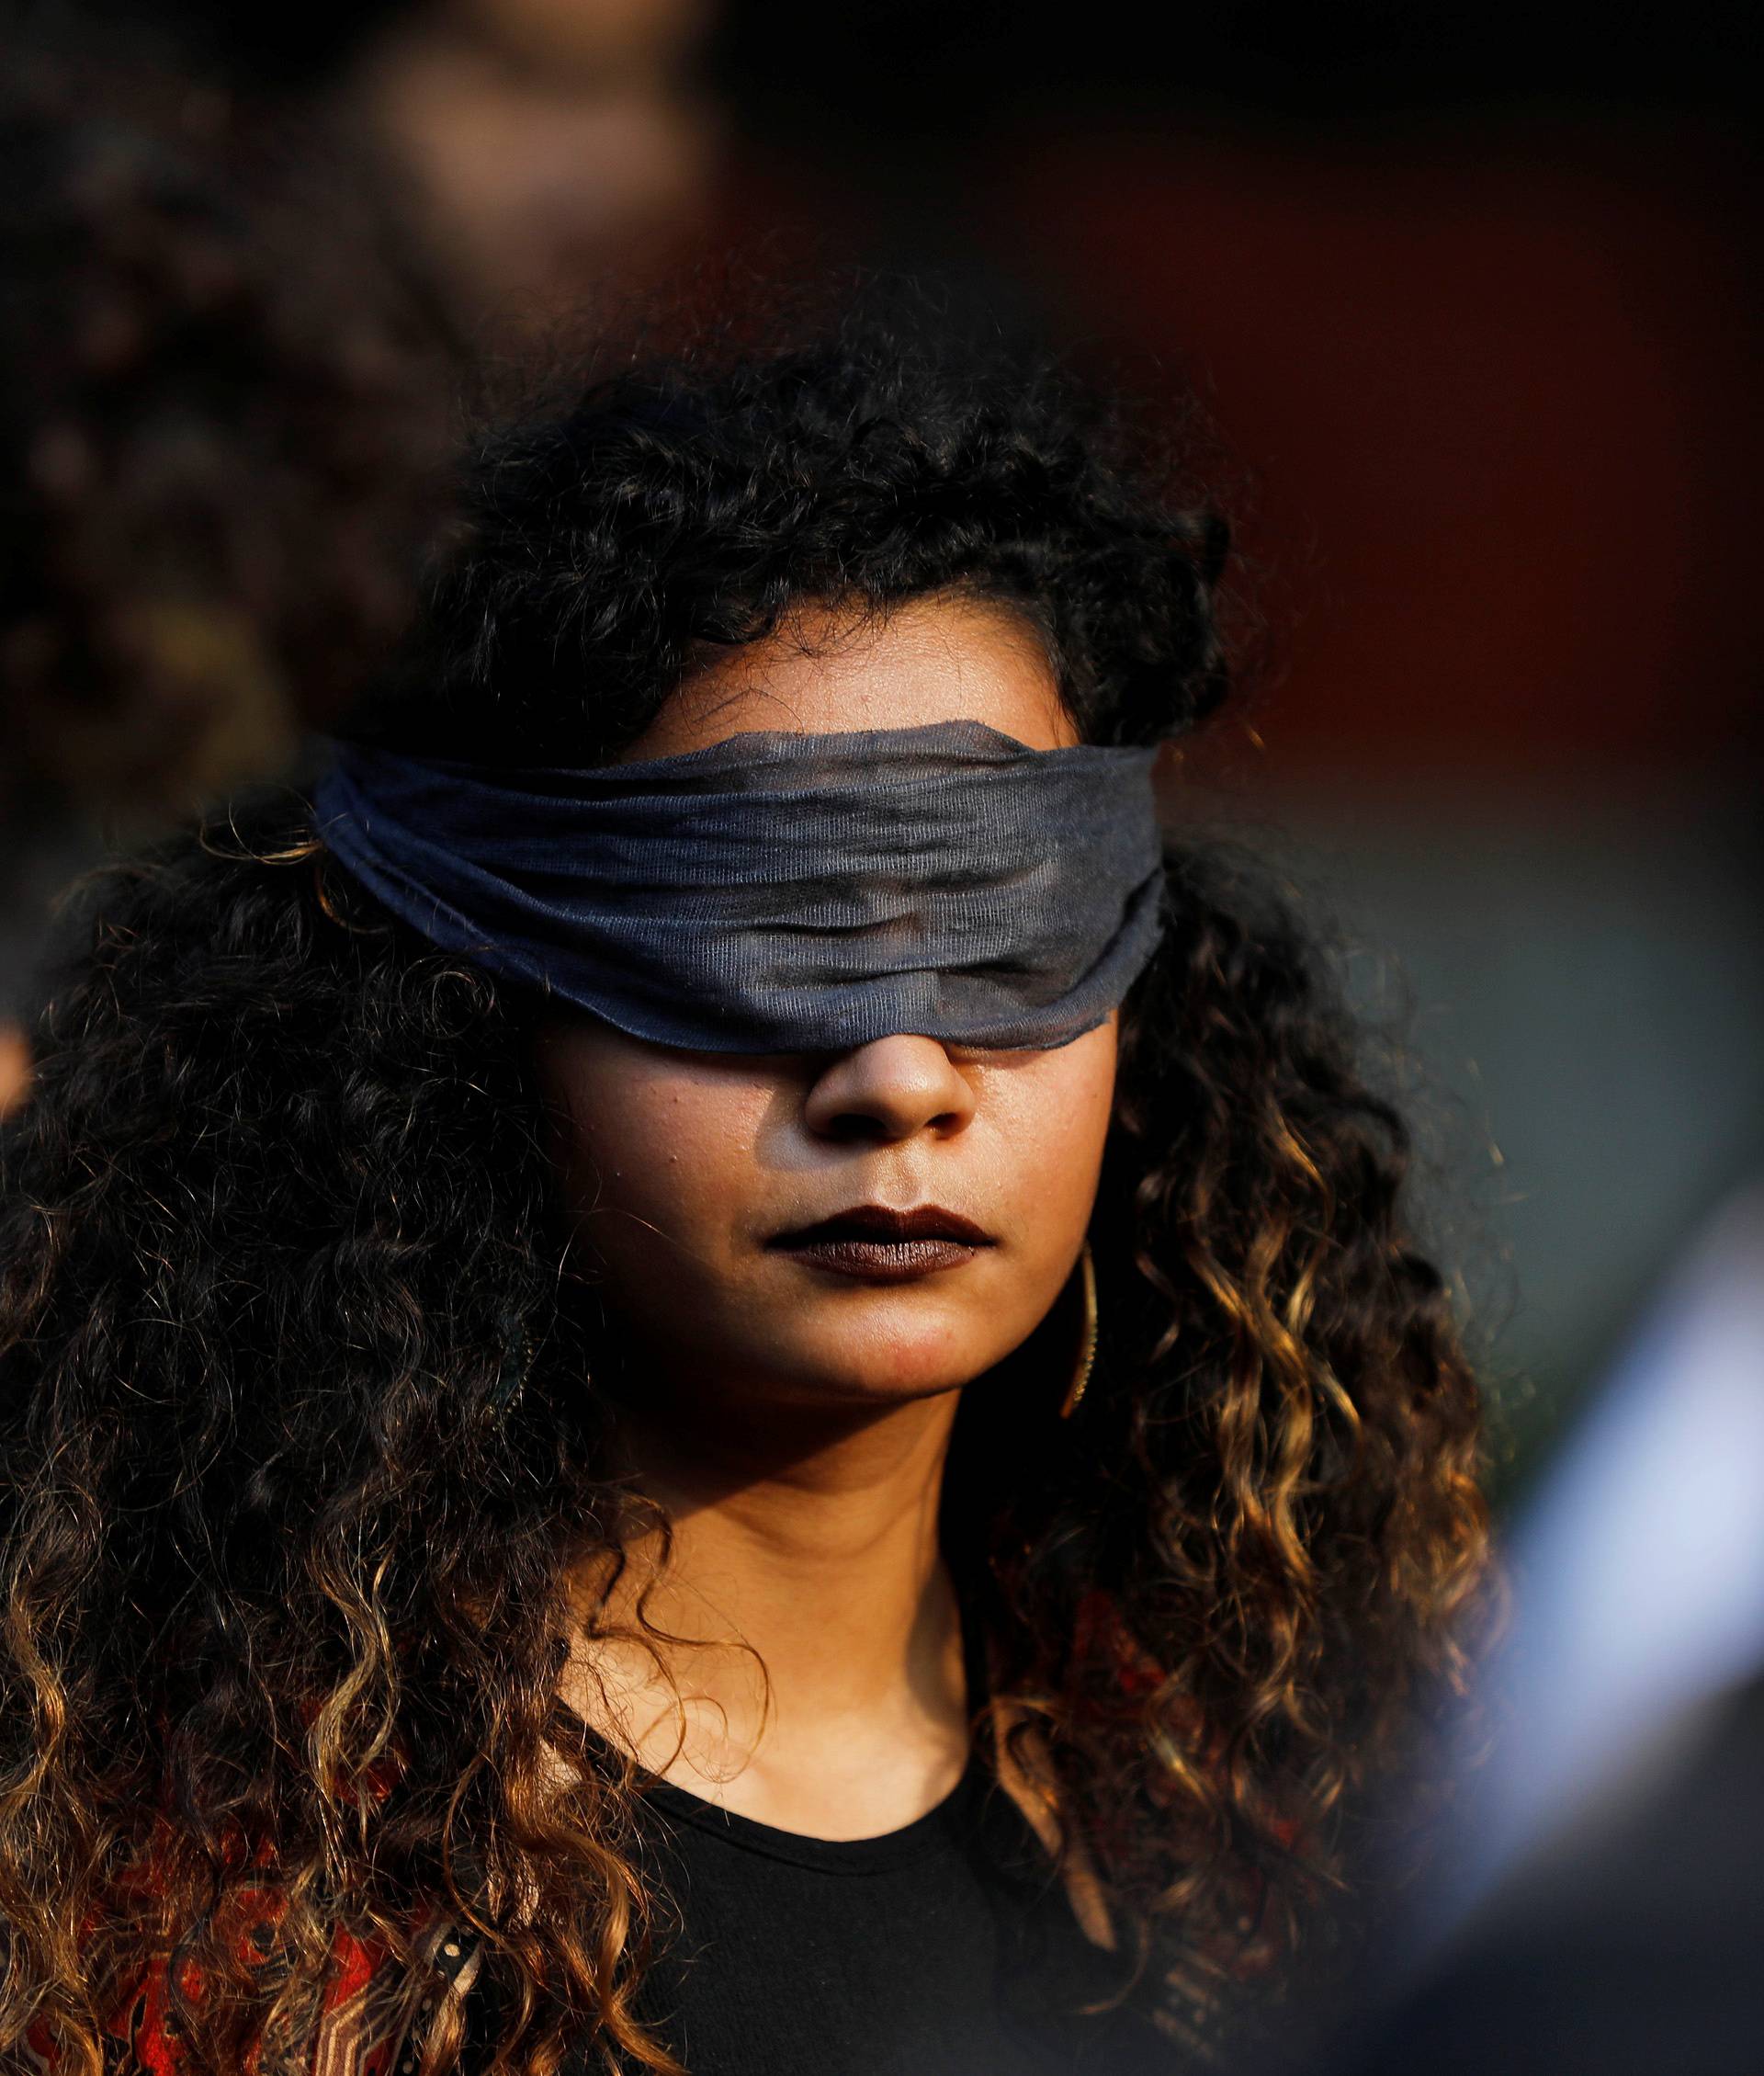 A protestor wearing a blindfold takes part in a protest in solidarity with rape victims and to oppose violence against women in India, in New Delhi